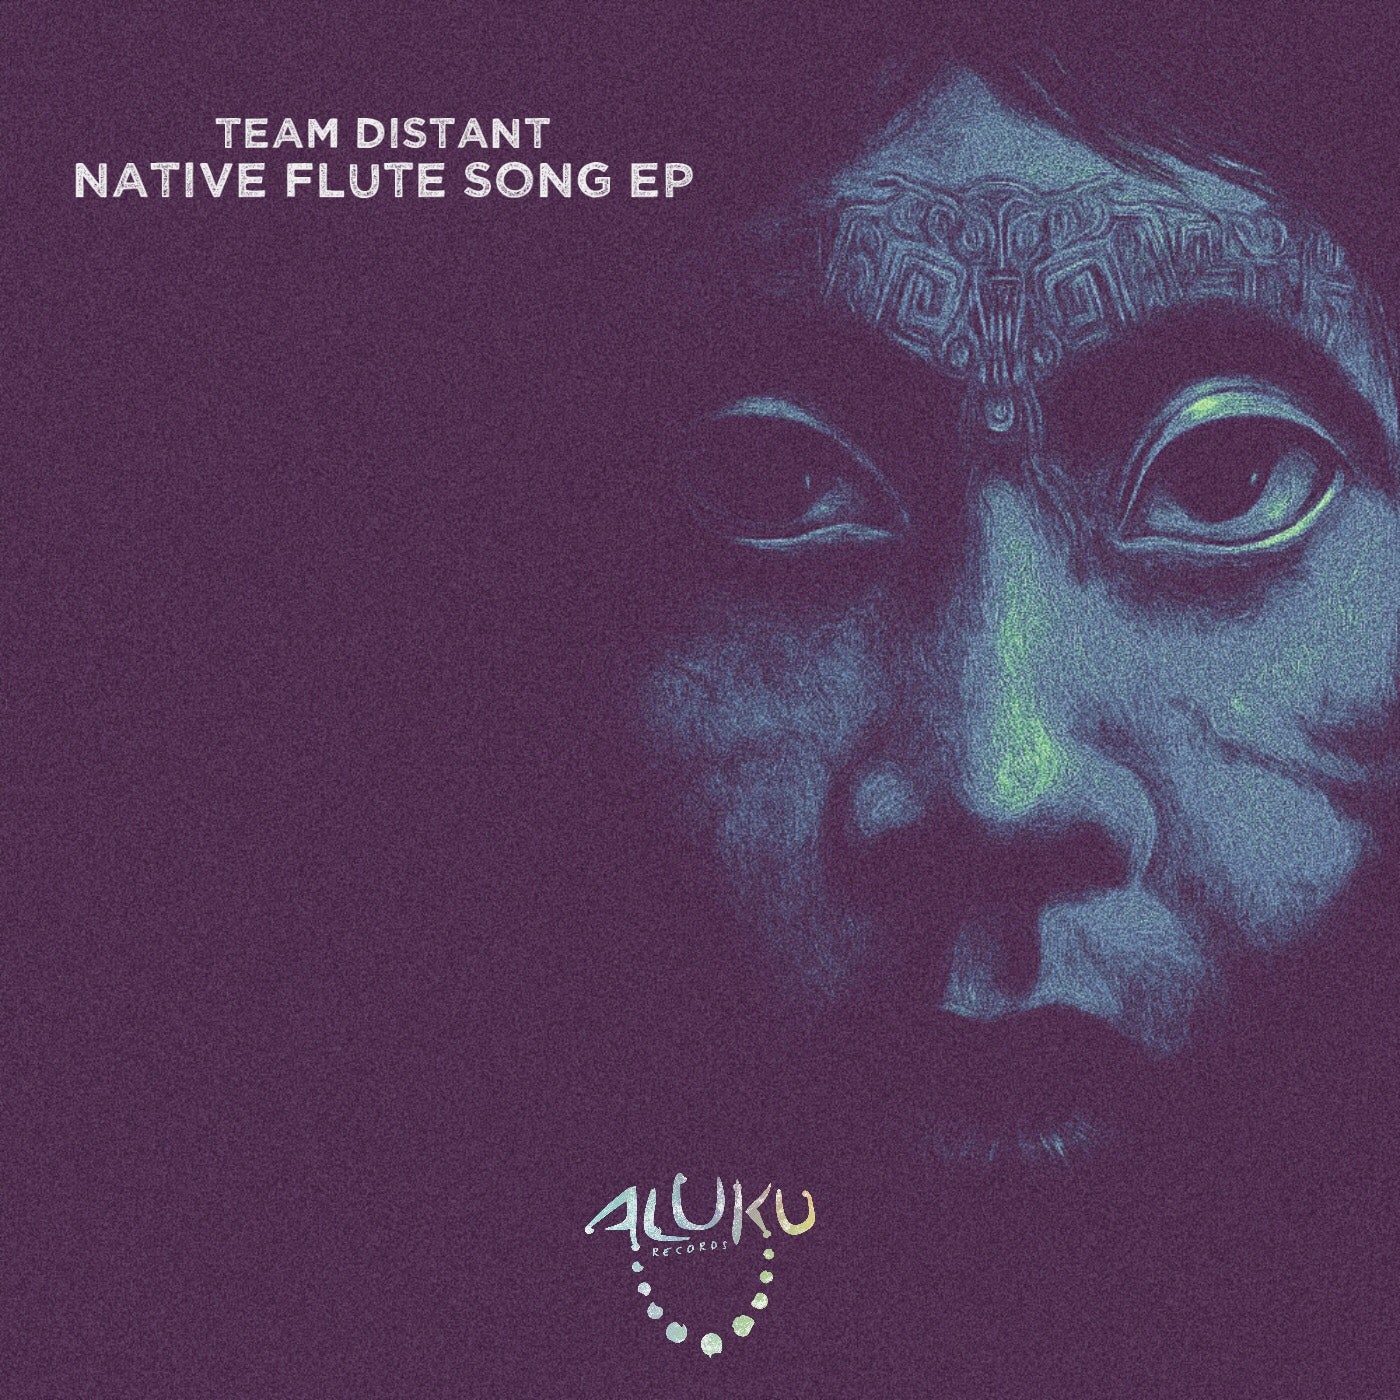 Native Flute Song EP